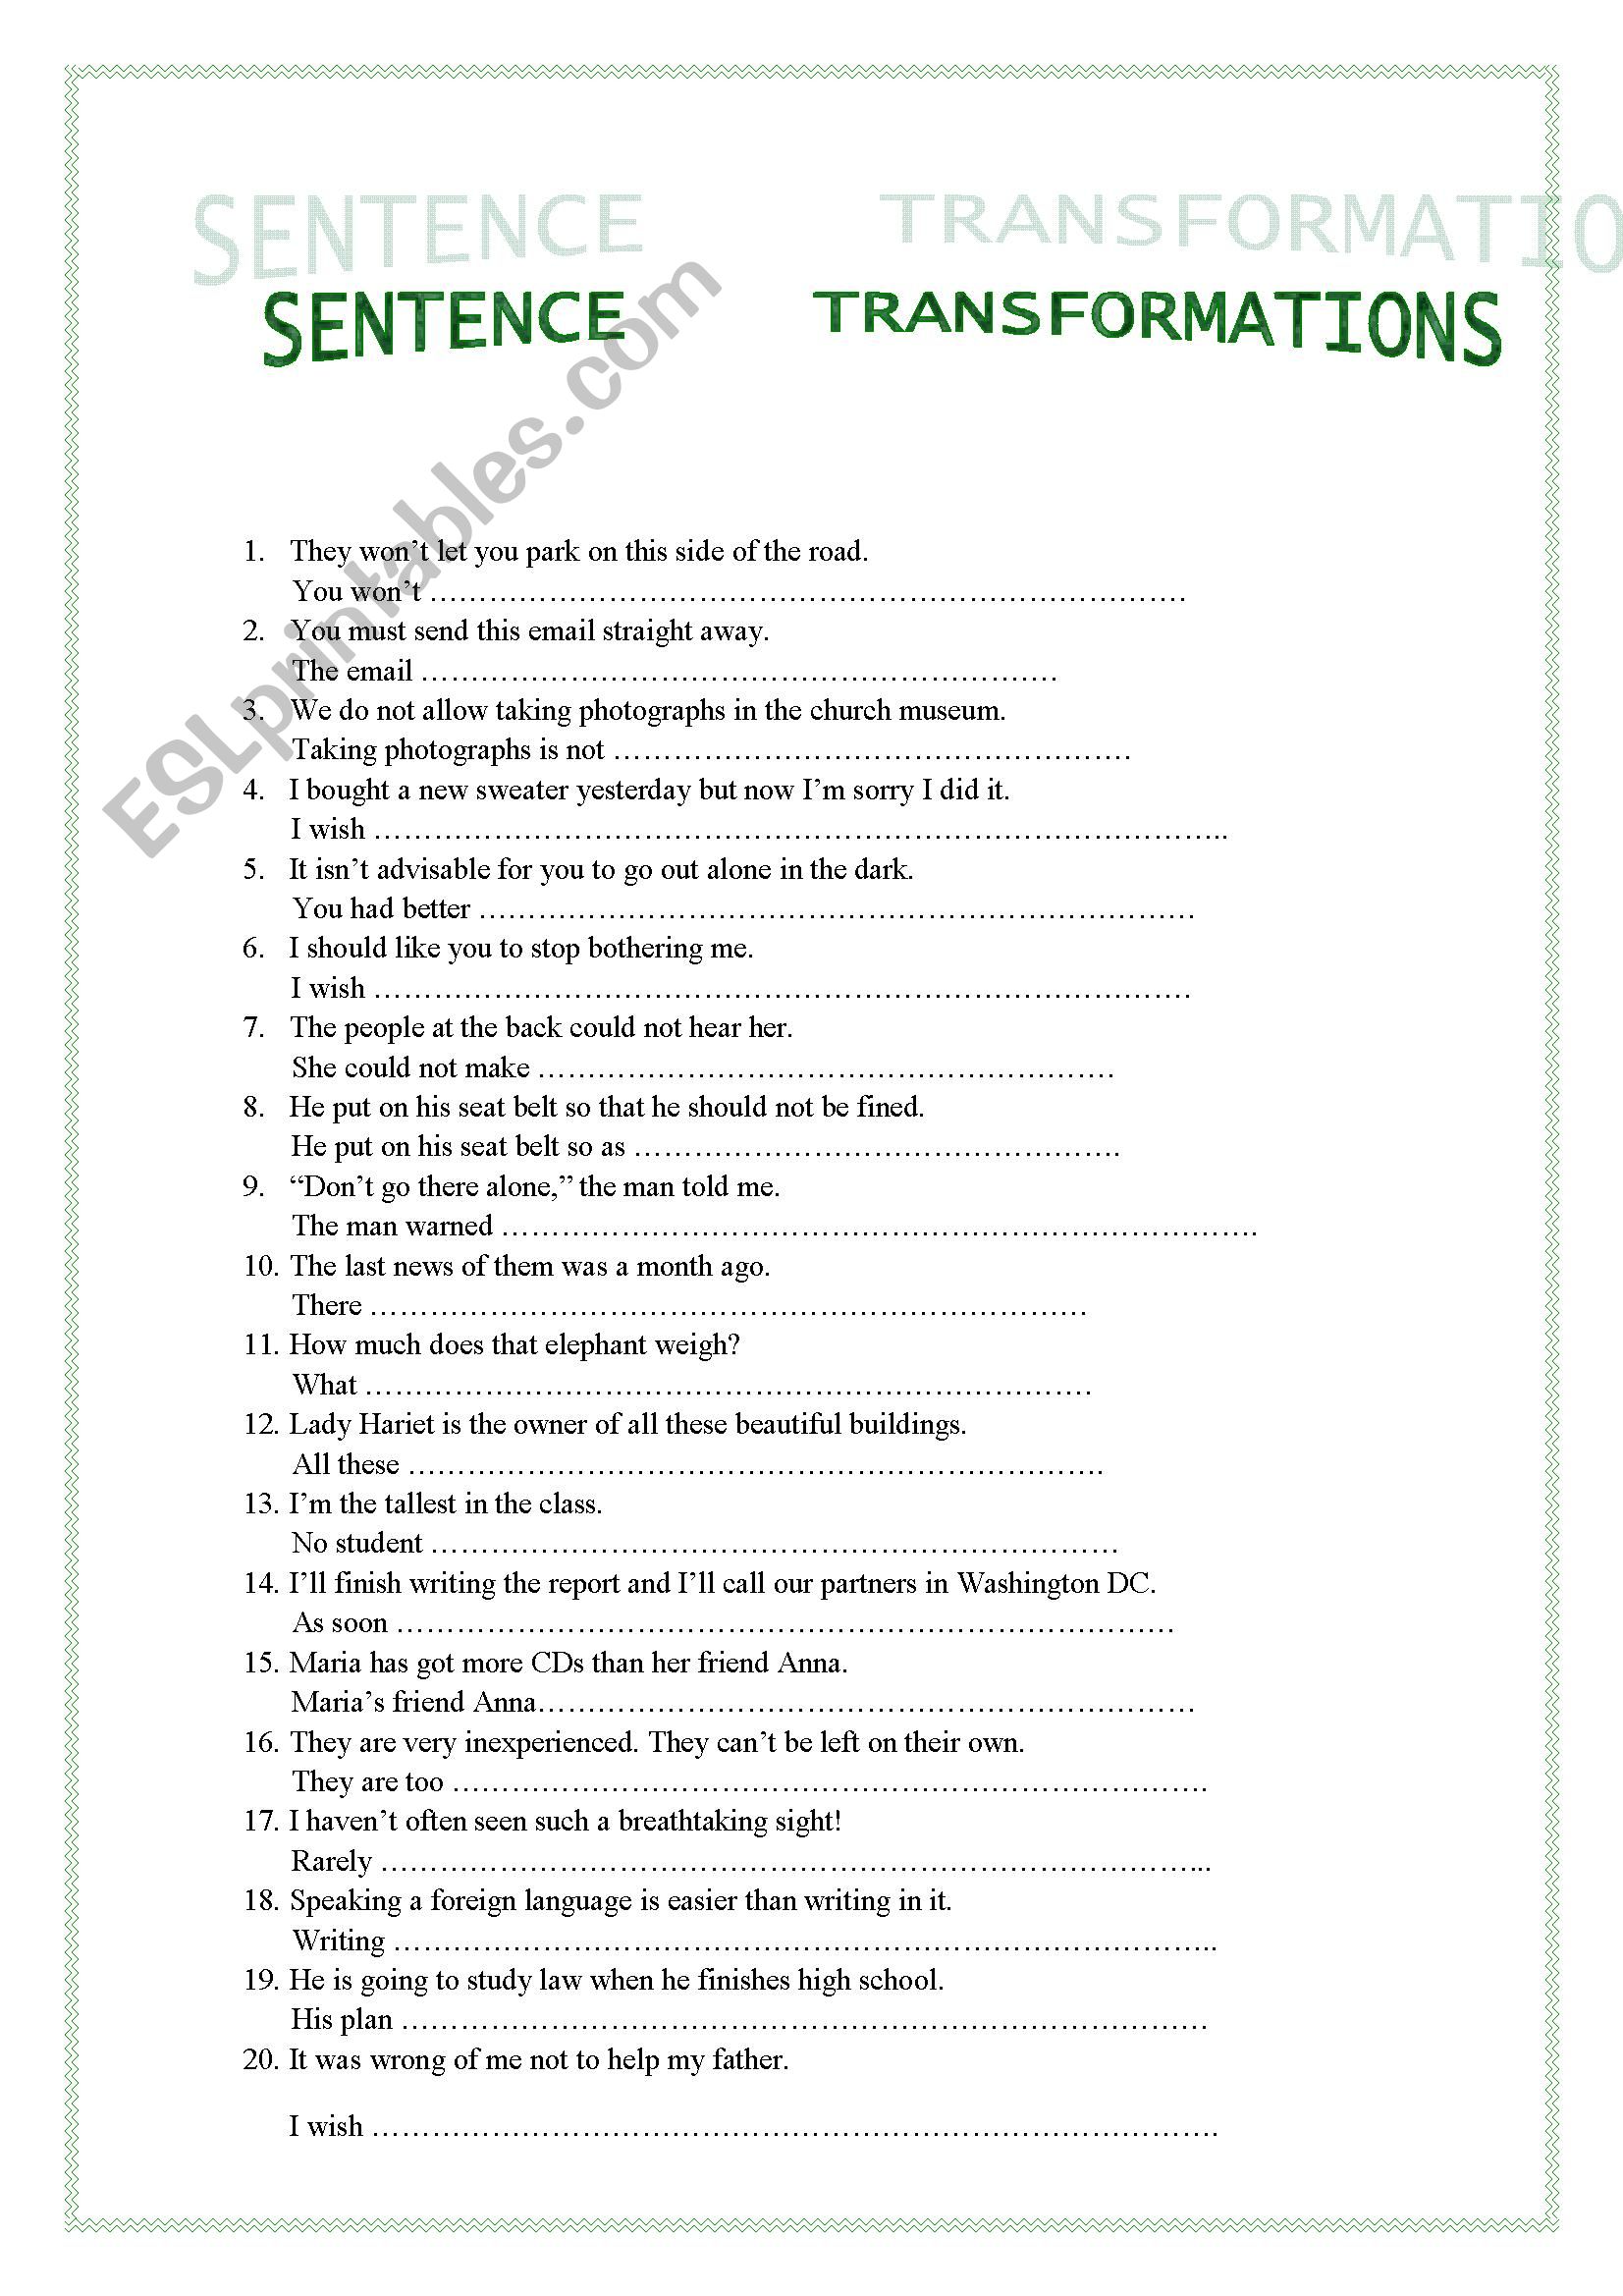 pin-by-thuyhahh-on-transformation-of-sentences-worksheet-sentences-grammar